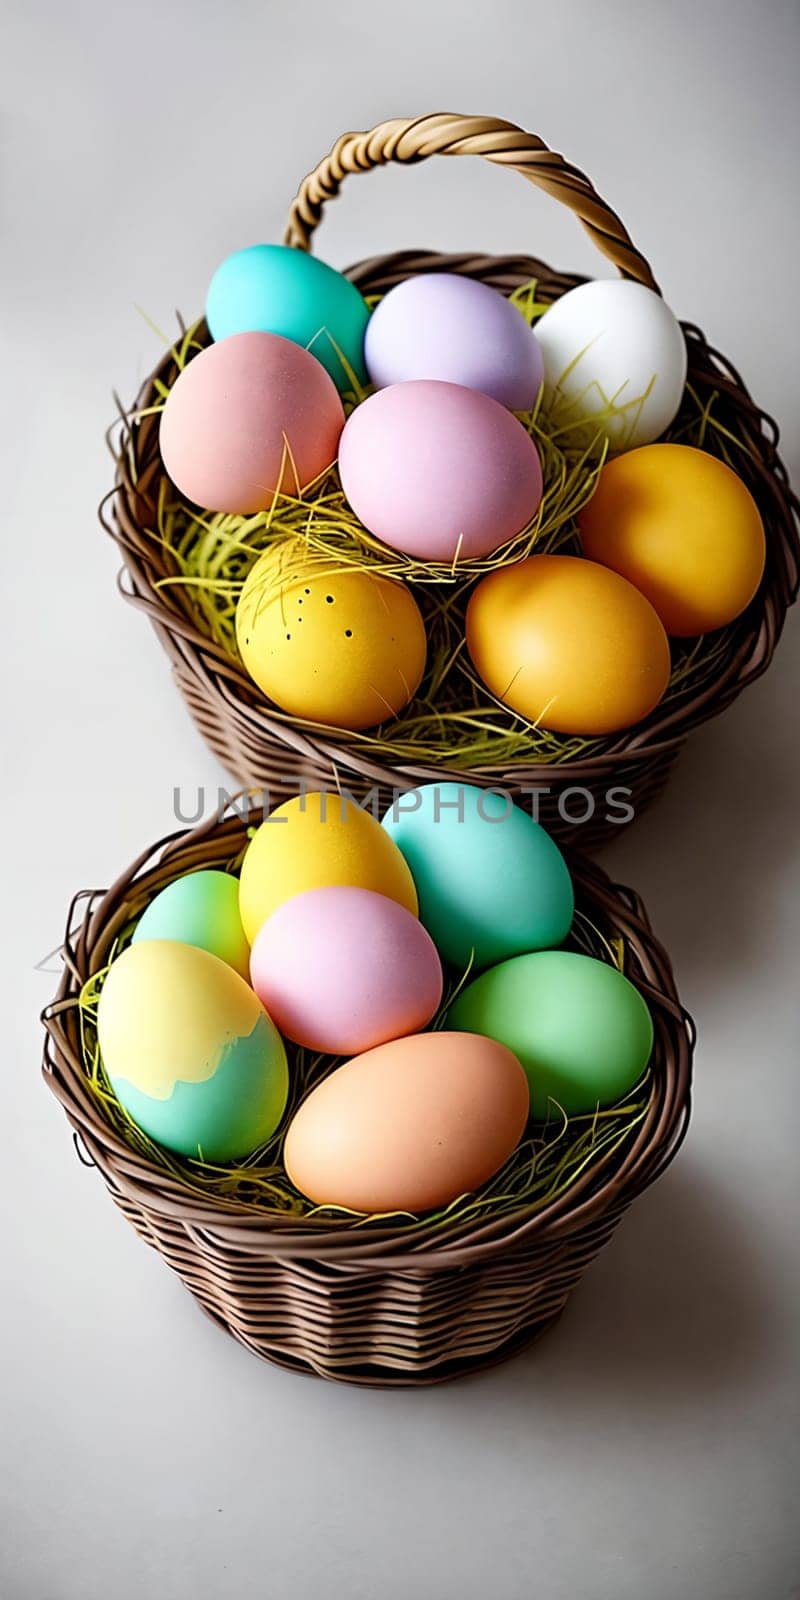 An intricate Easter card design featuring a variety of beautifully decorated eggs. Easter desing